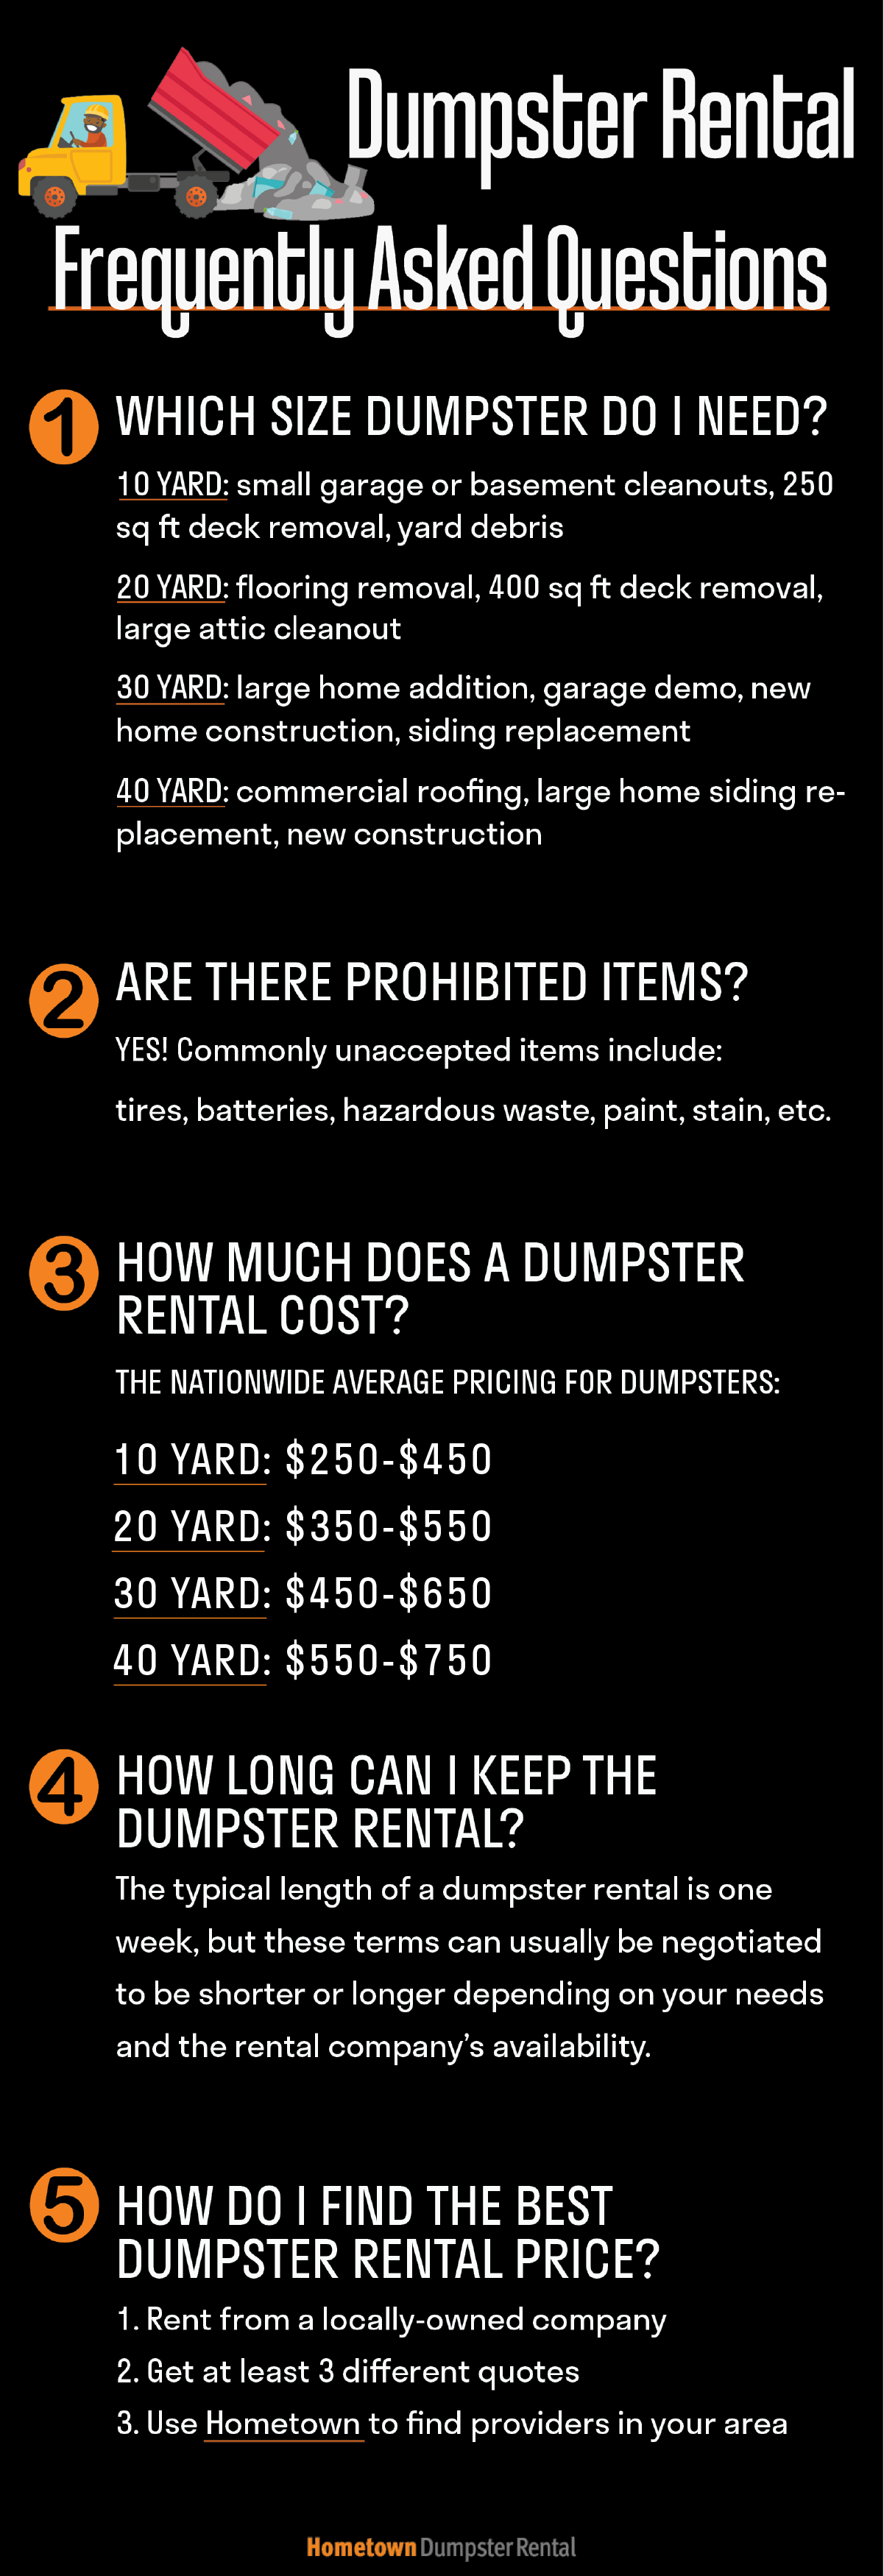 dumpster rental frequently asked questions infographic